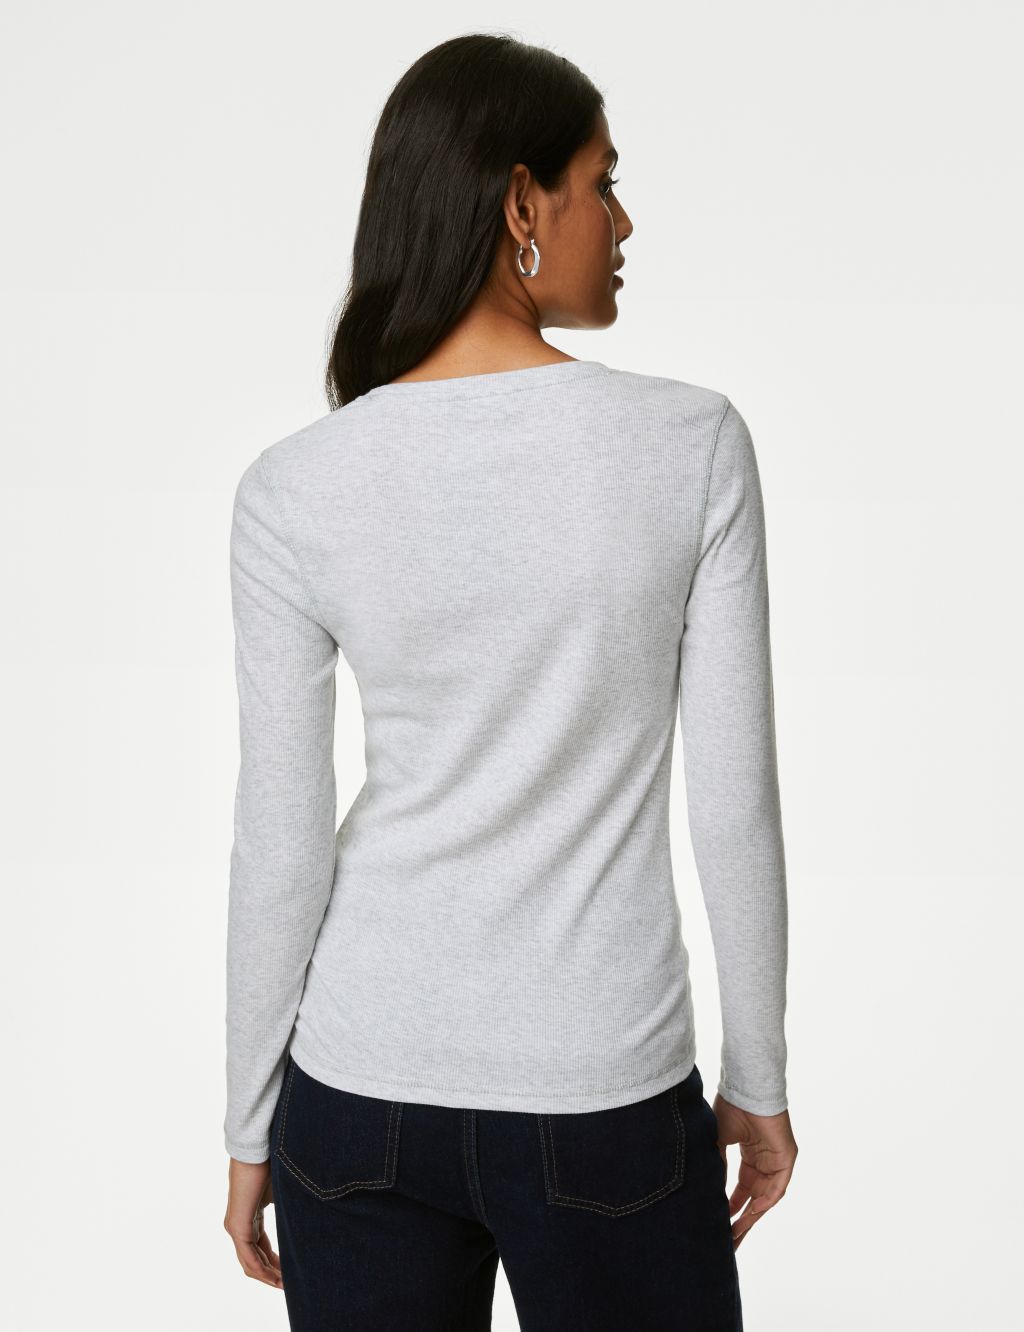 Cotton Rich Ribbed Top image 5